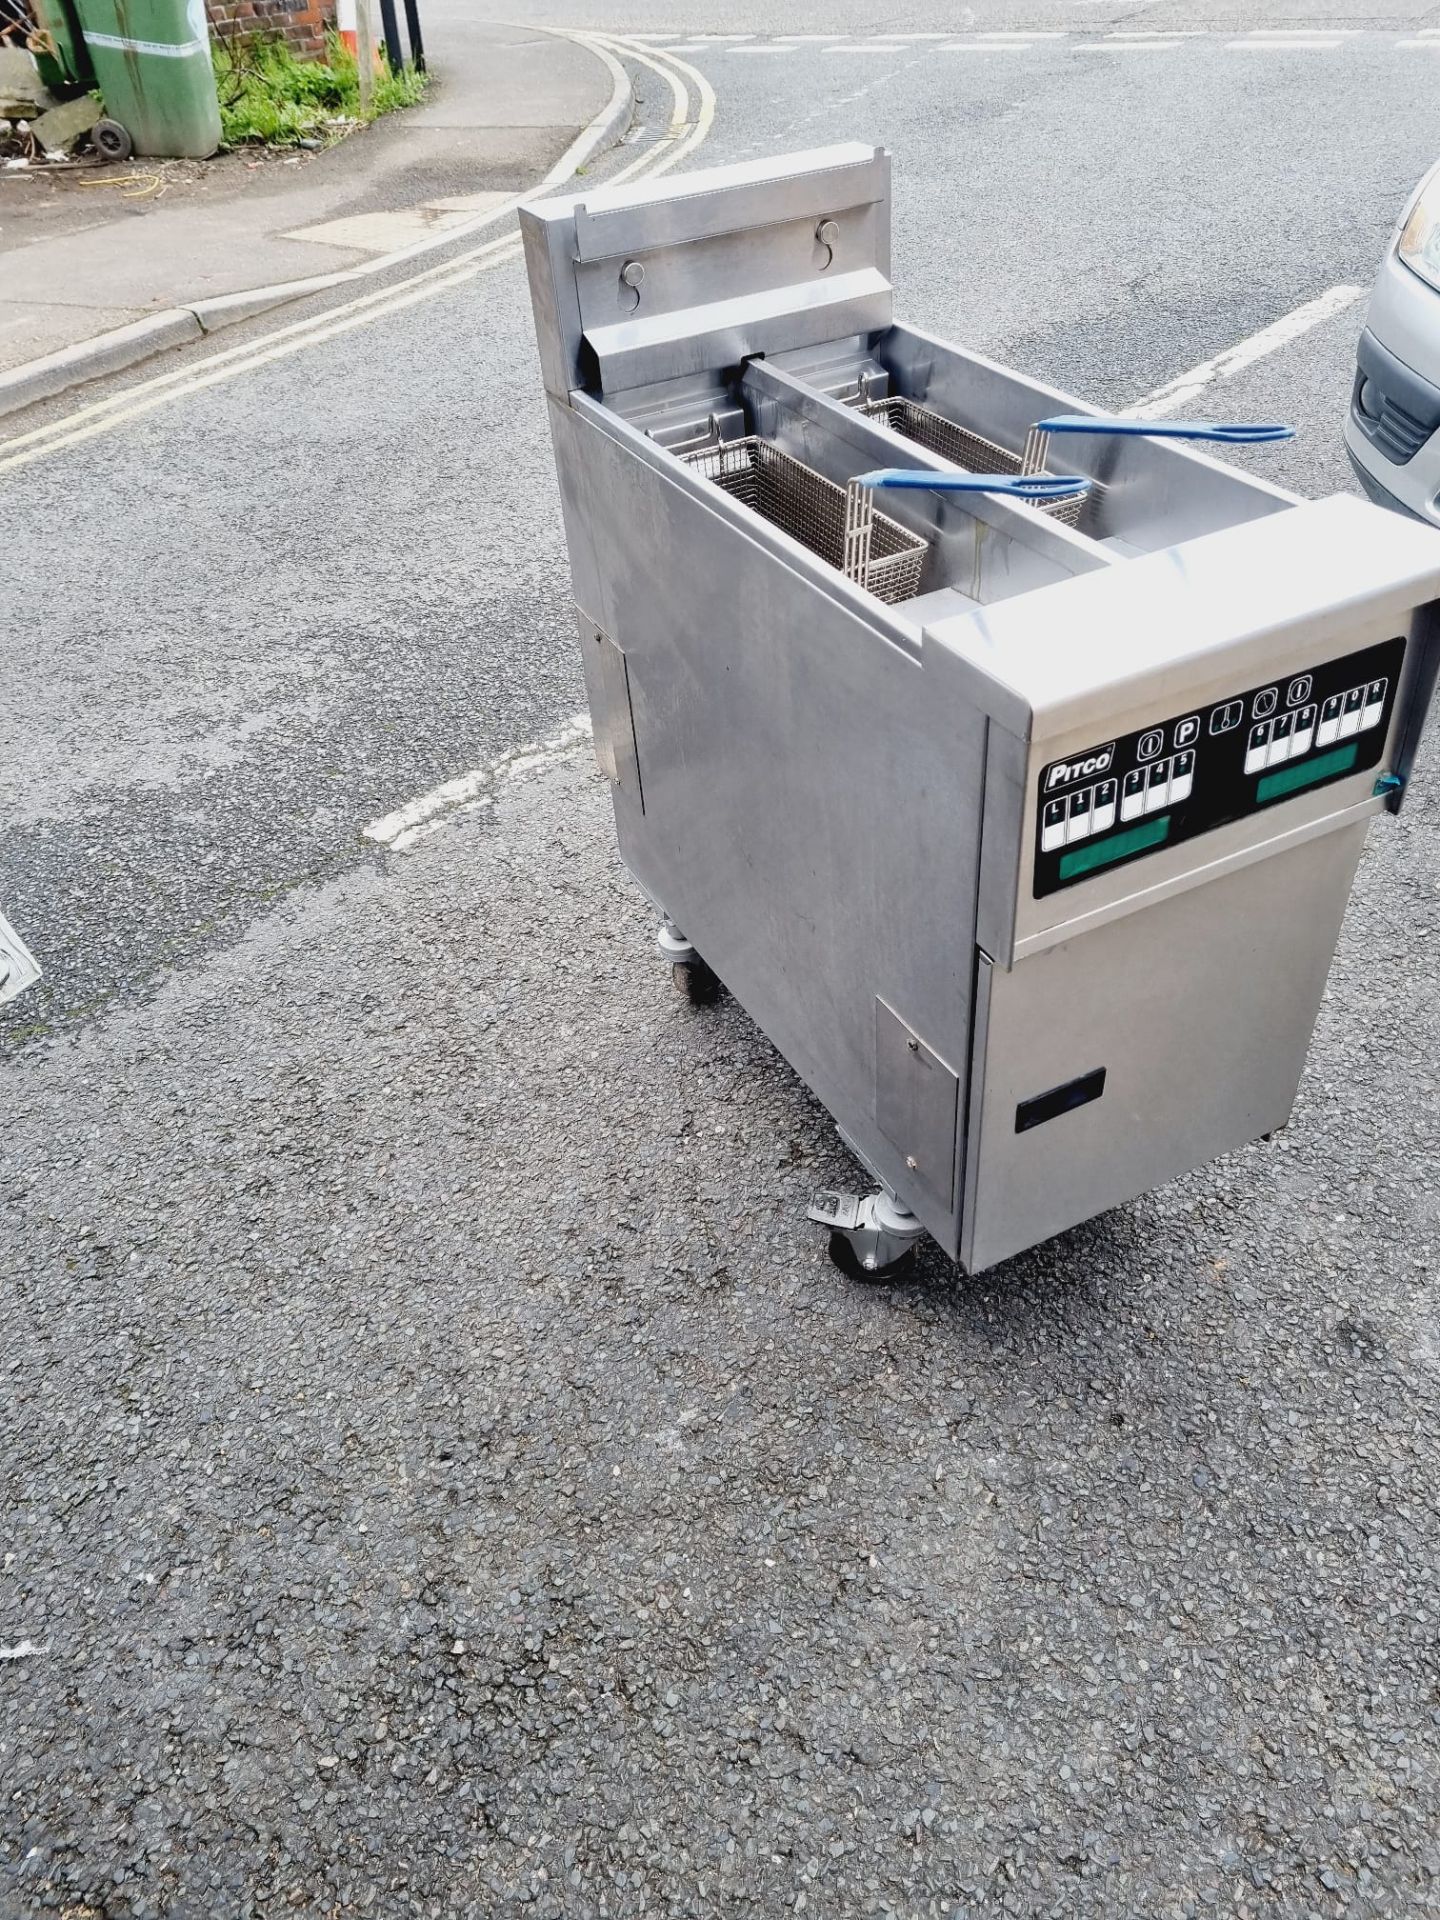 PITCO DOUBLE TANK ELECTRIC FRYER - FULLY COMPUTER - 3 PHASE ELECTRIC - Image 2 of 6